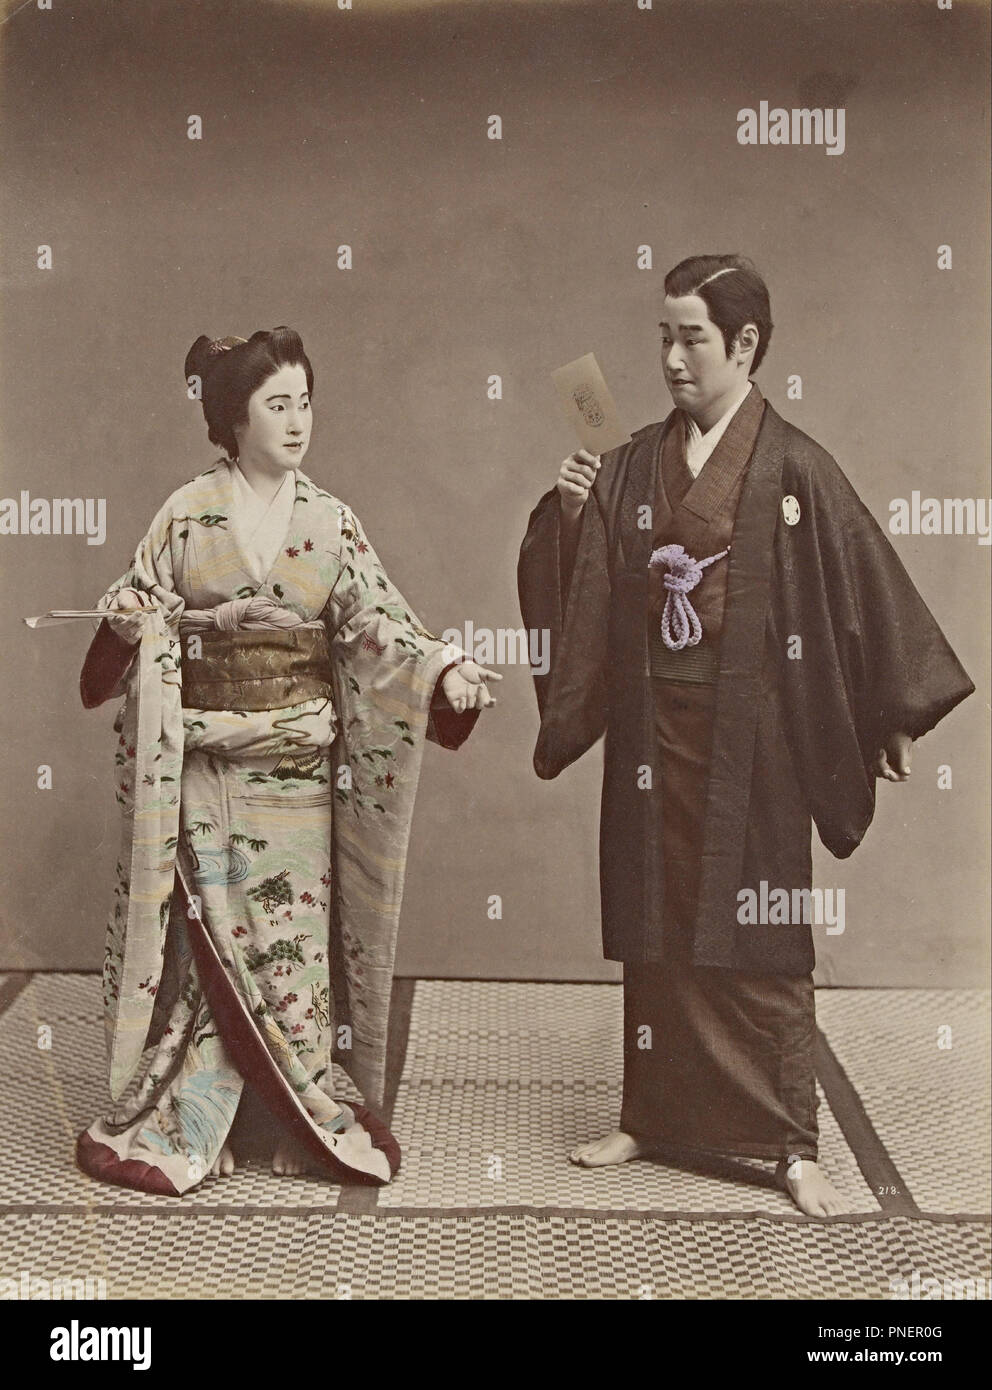 No title (Couple with a cabinet photograph and ghost in background). Date/Period: 1880s. Photographyy. Albumen silver photograph, colour dyes albumen silver photograph, colour dyes. Height: 265 mm (10.43 in); Width: 204 mm (8.03 in). Author: Kusakabe Kimbei. Stock Photo